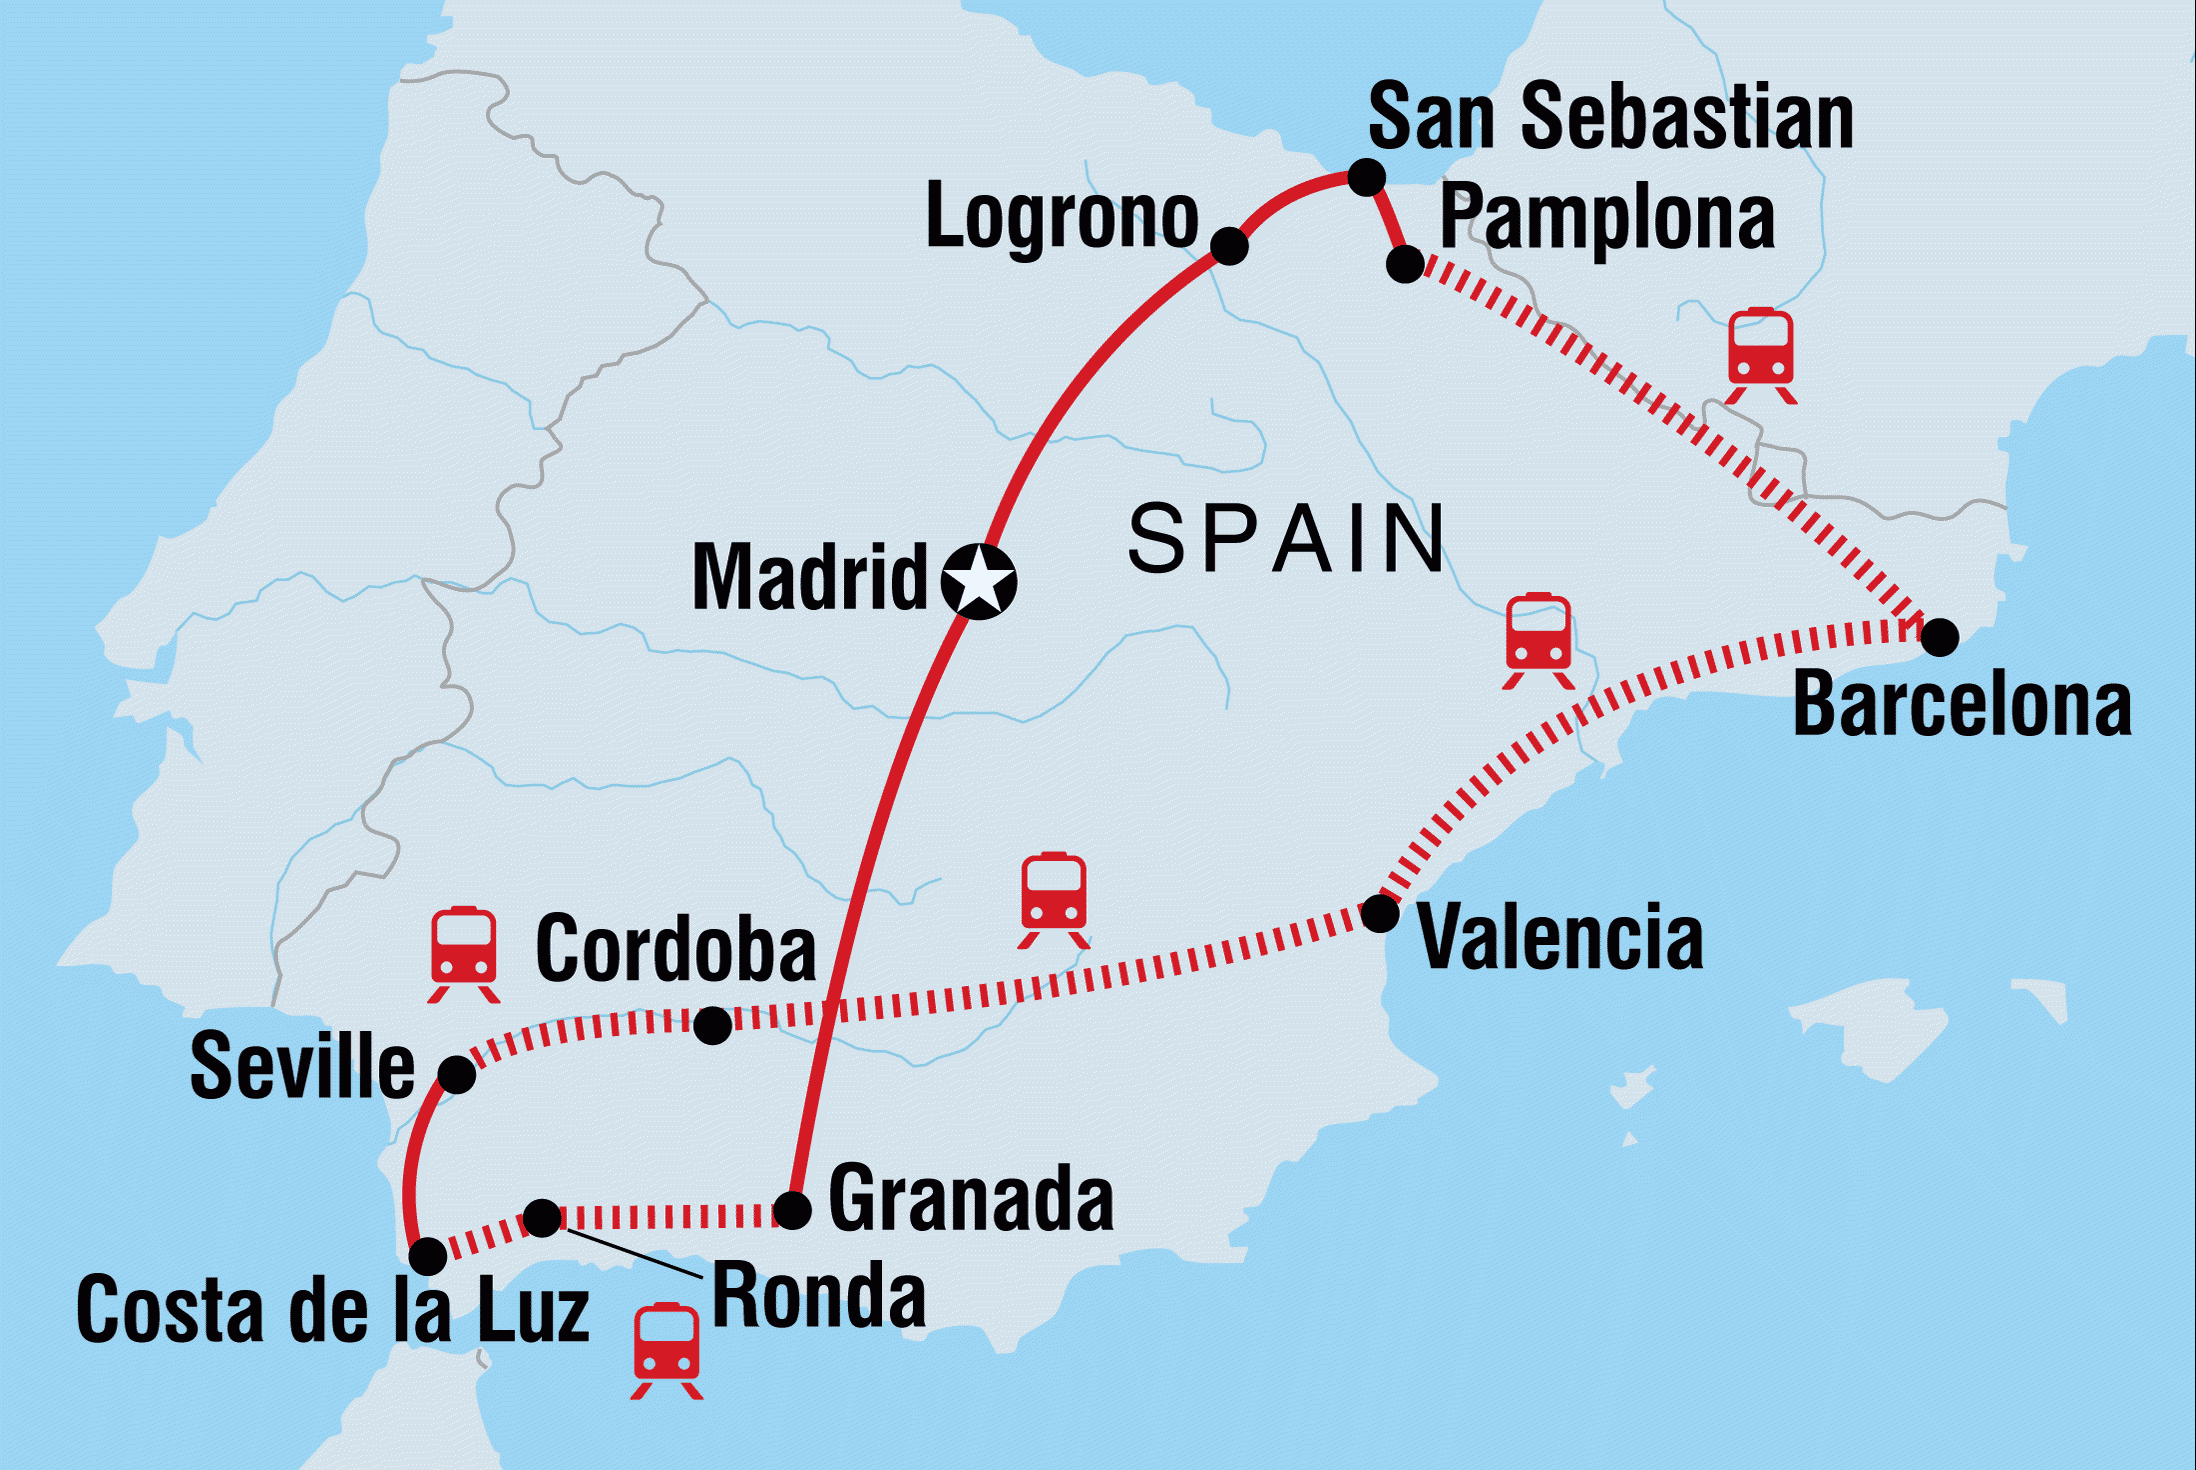 Spain Information of